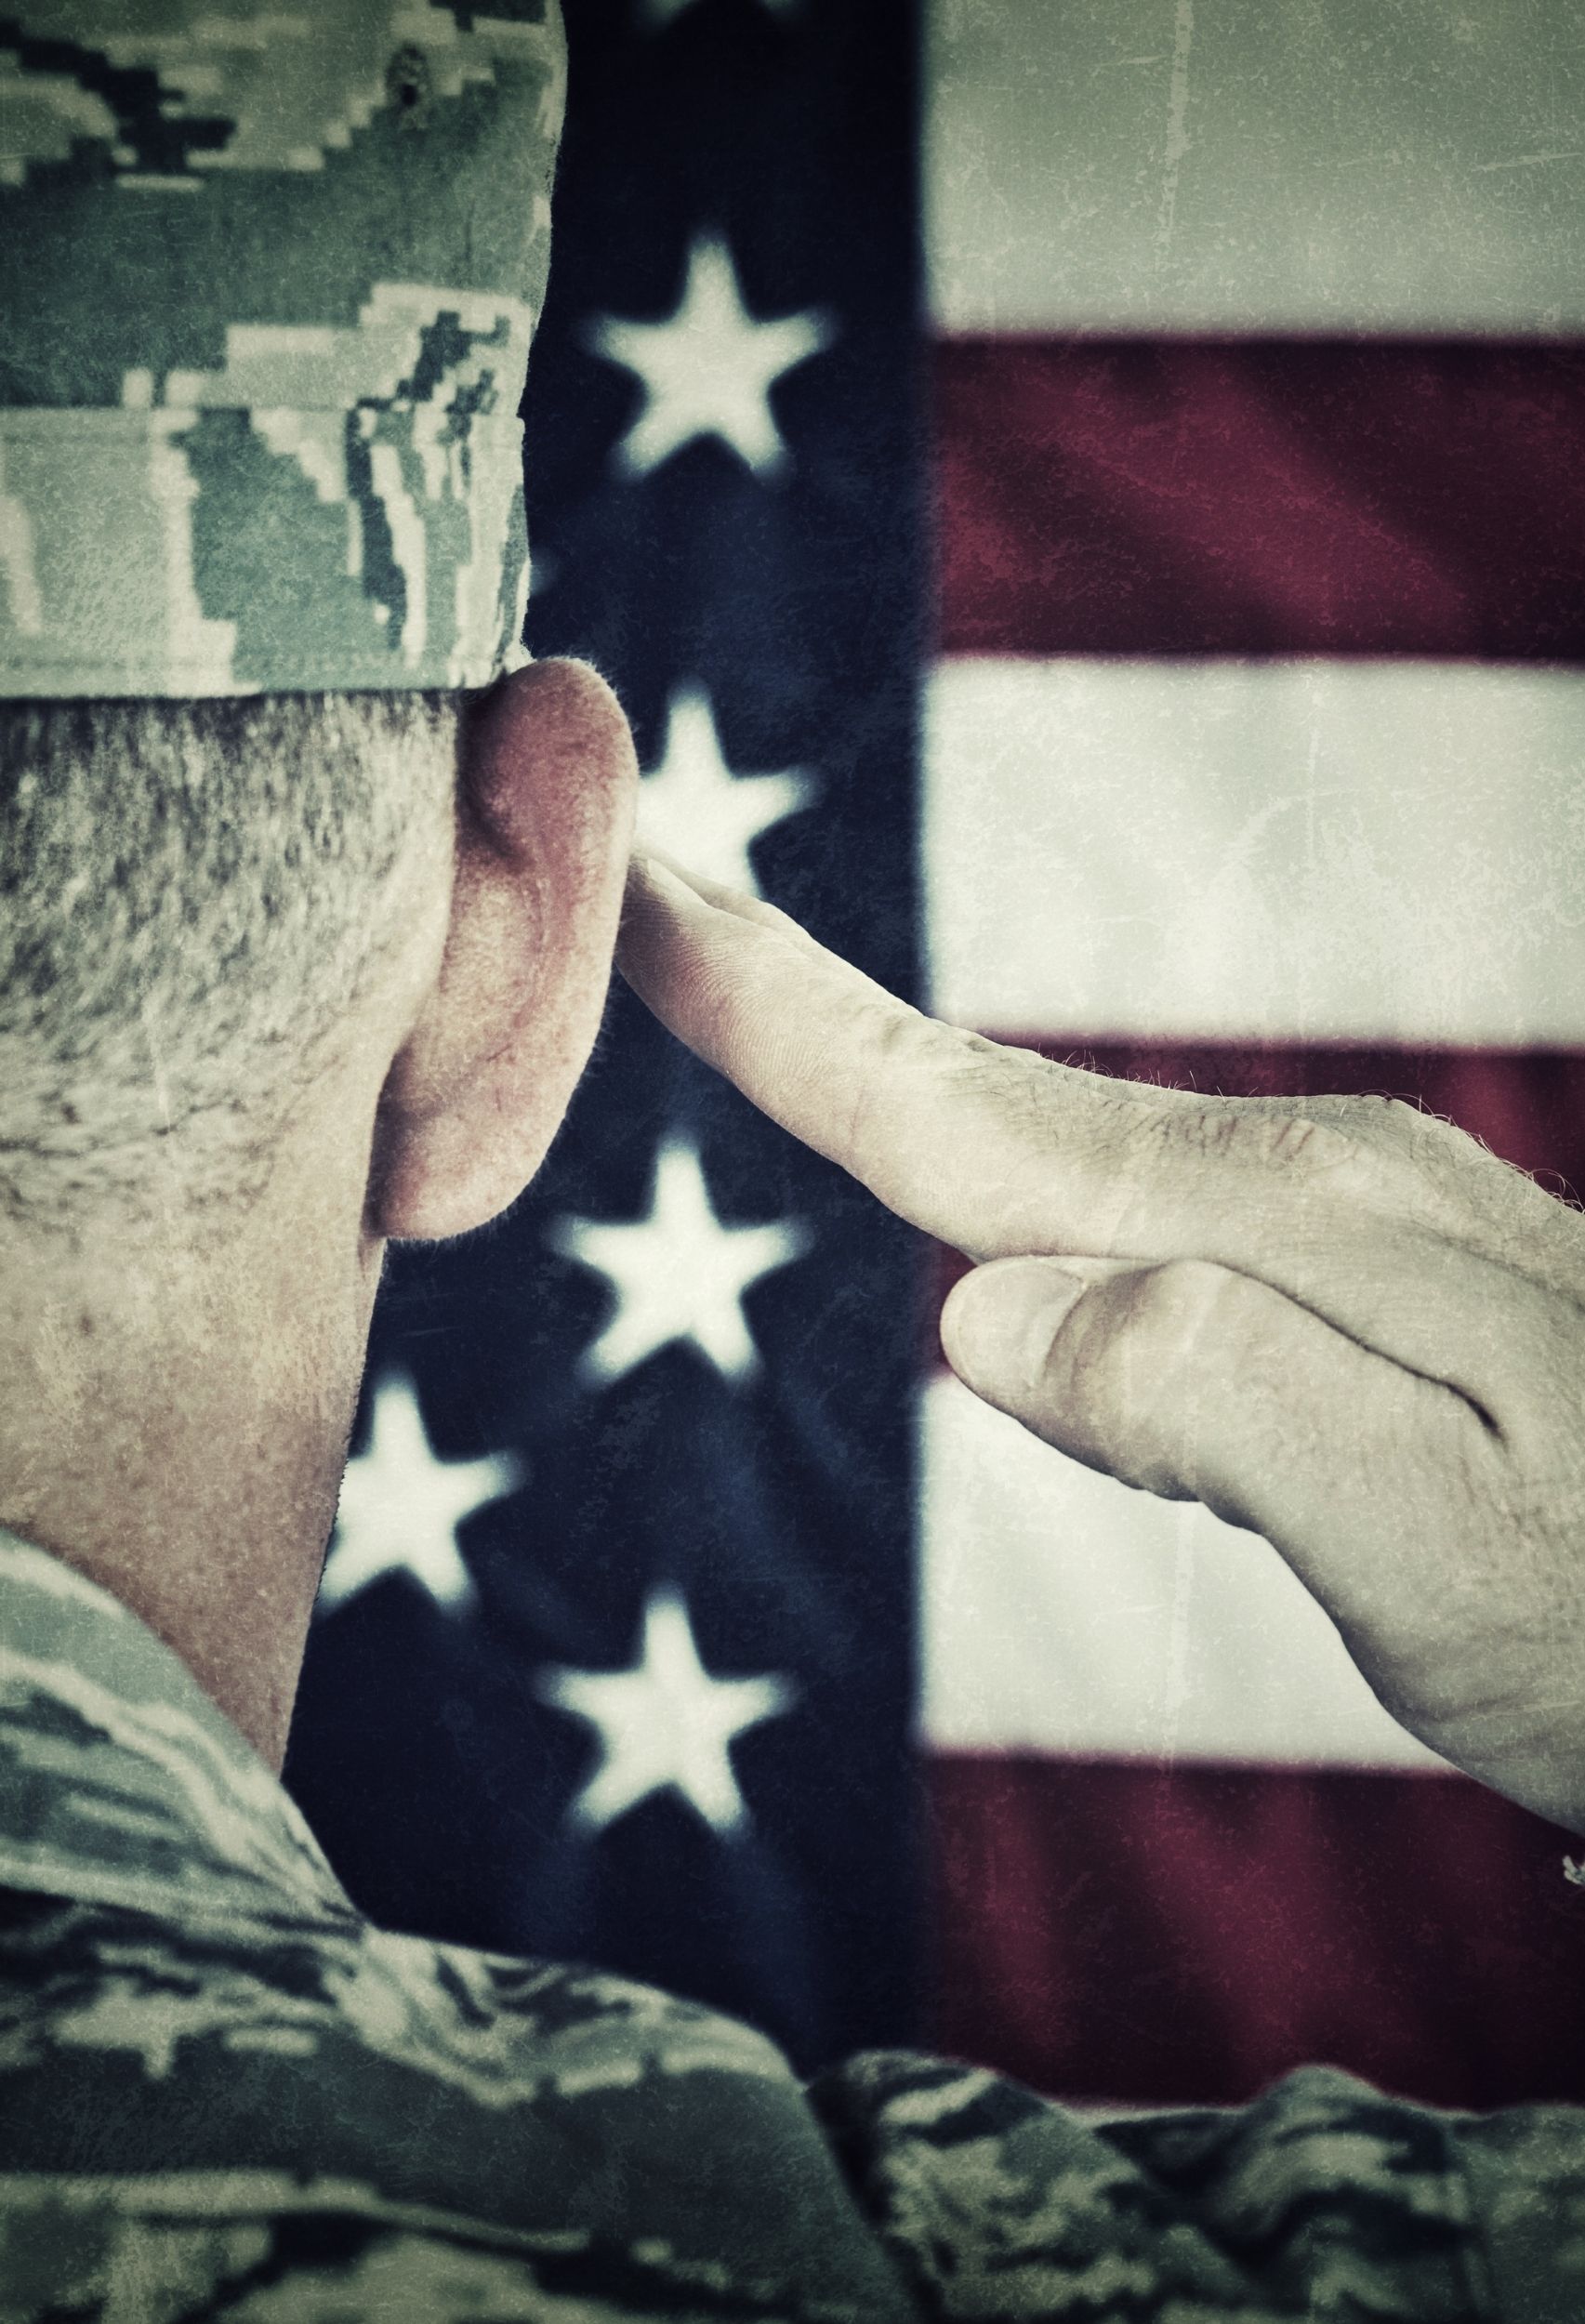 5 Great Business Ideas for Military Veterans